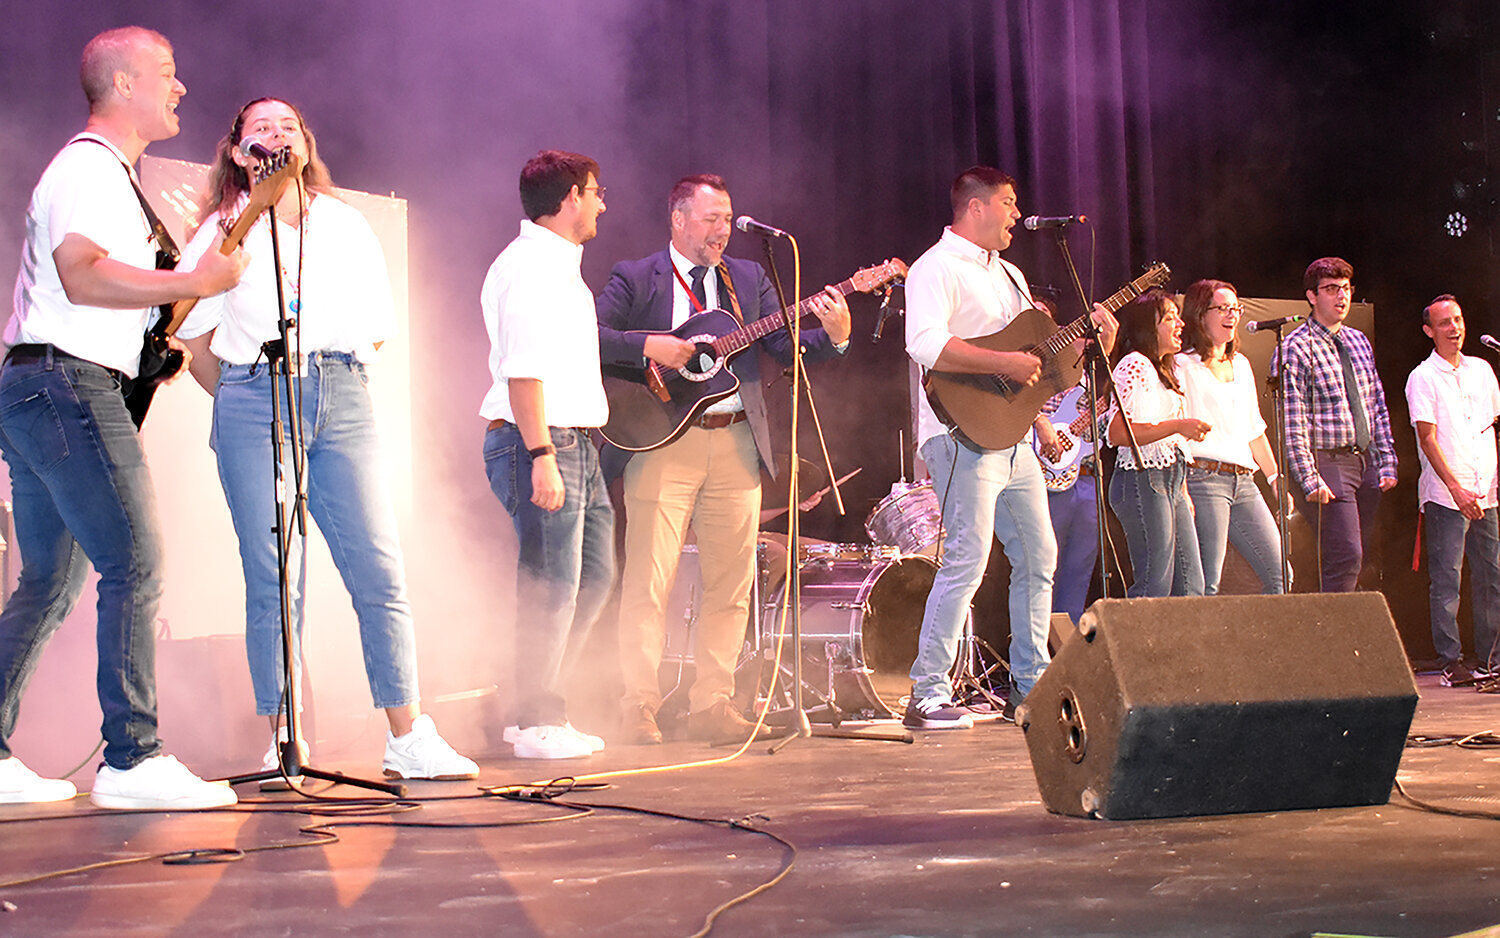 Chris Zublionis, fourth from left, and music teachers from the North Shore performed “Listen to the Music” to pump everyone up for the start of the school year.